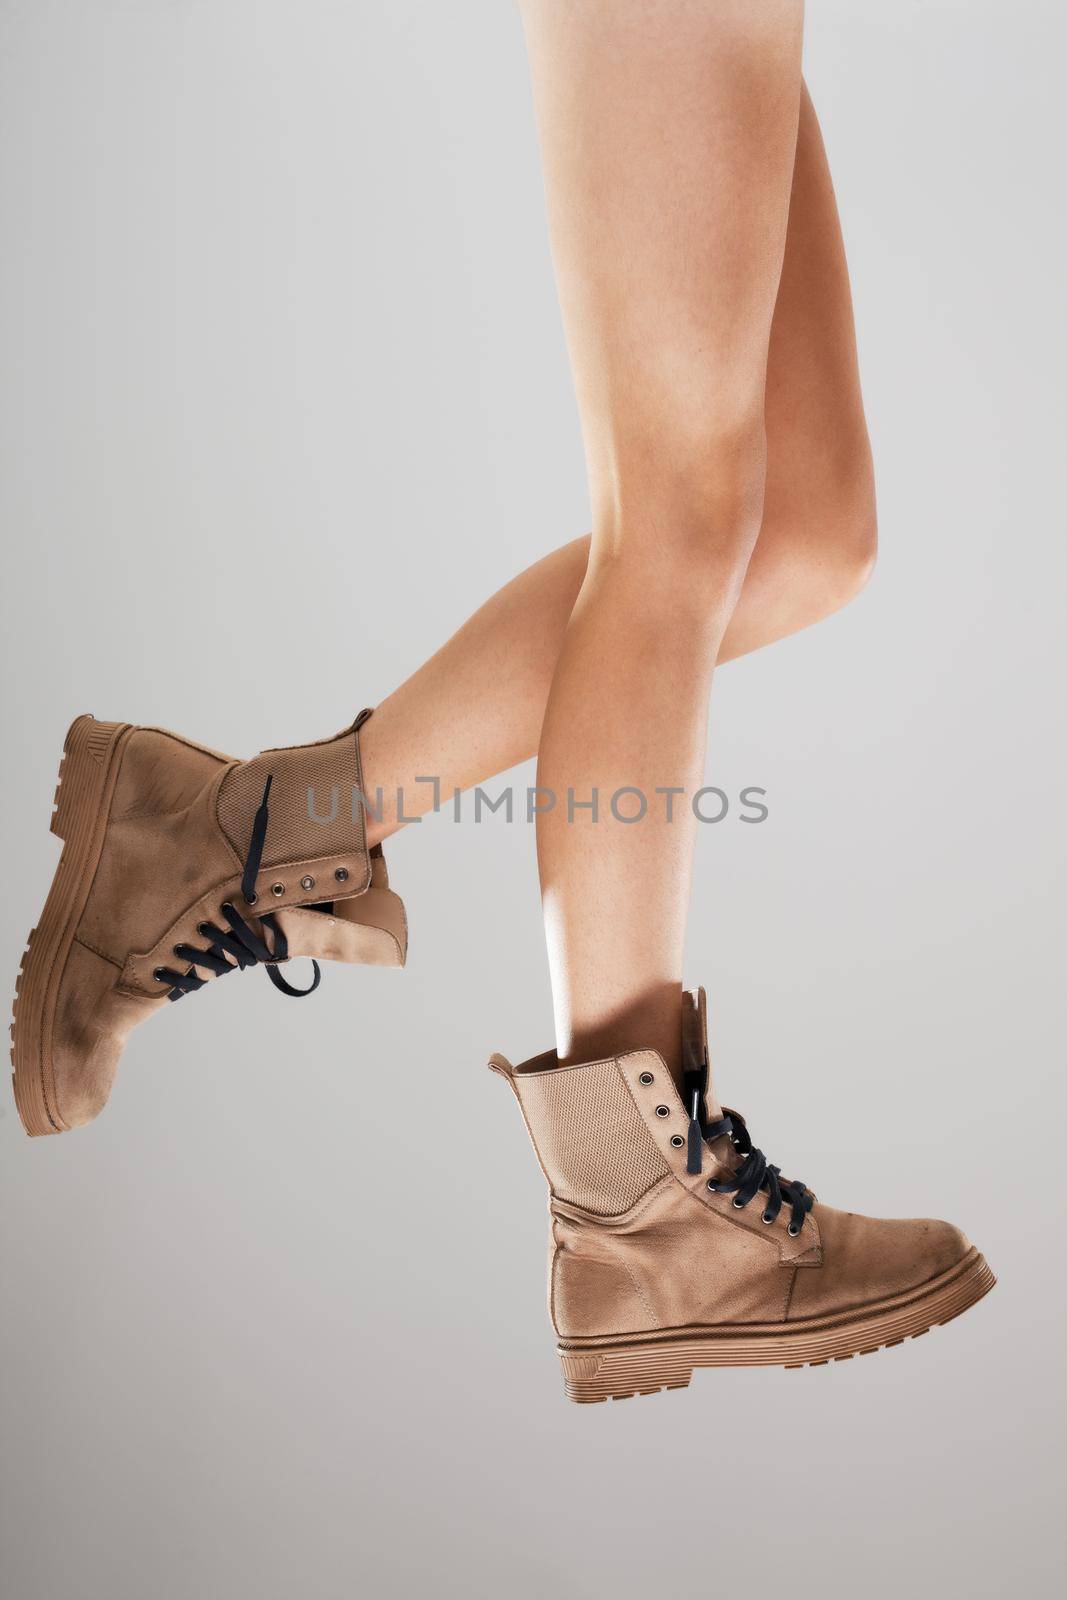 Sexy female legs wearing boots against gray background.